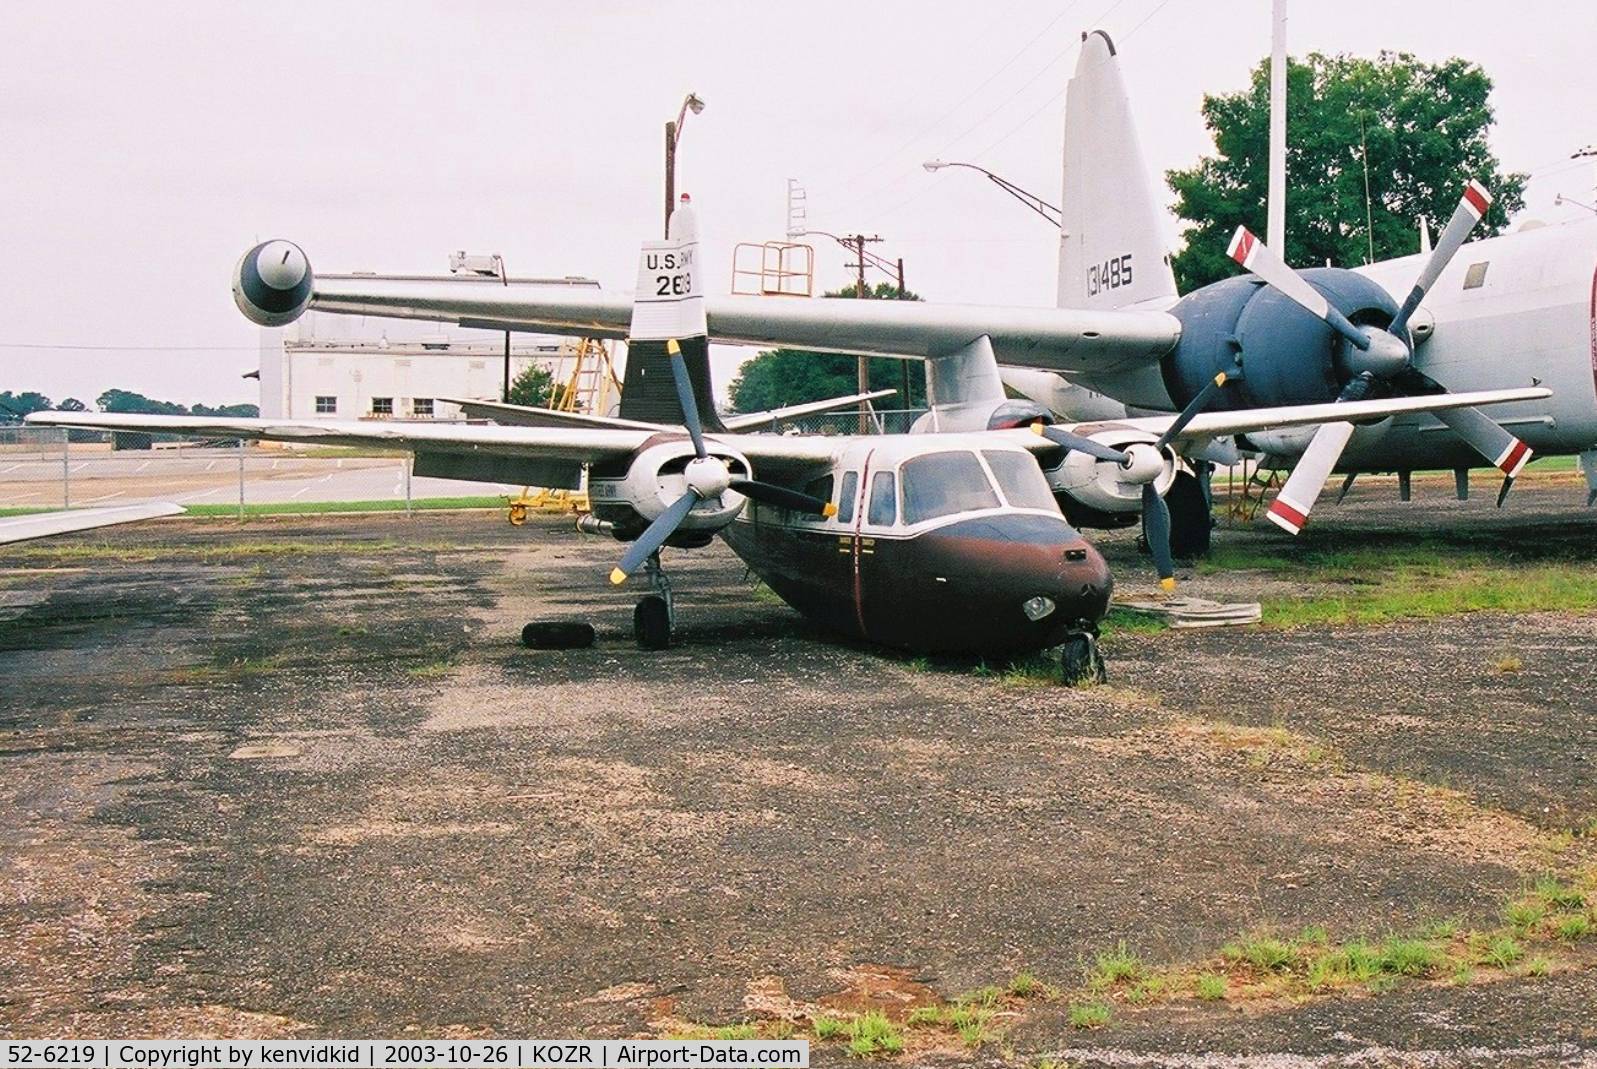 52-6219, 1952 Aero Commander YU-9A (YL-26) C/N 520-23, At the Fort Rucker Museum storage compound.